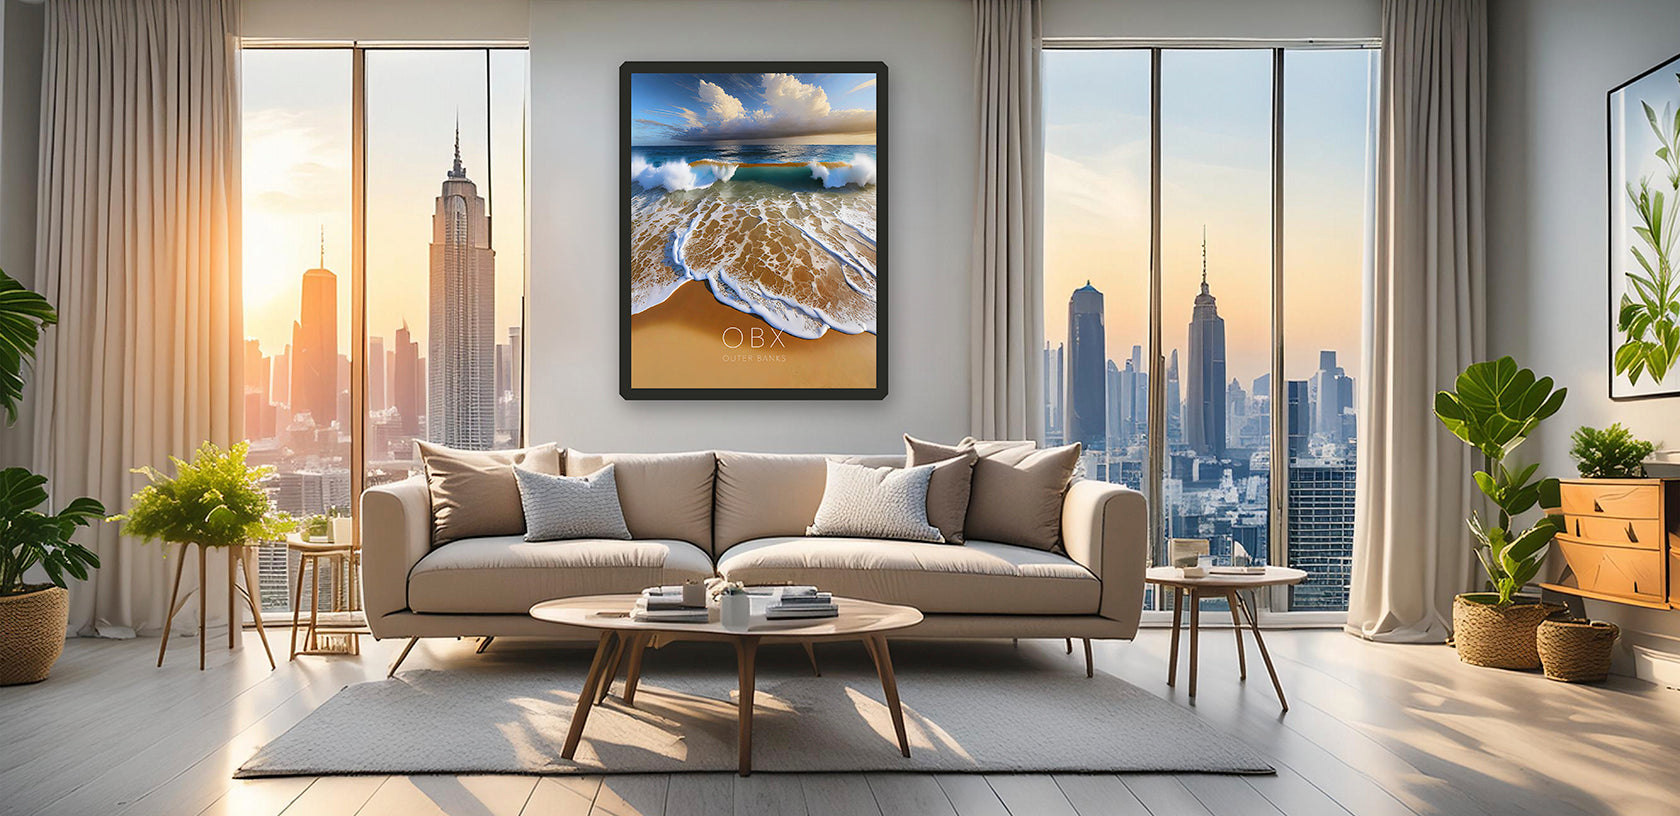 Download Poster Art City Living Room Example 1